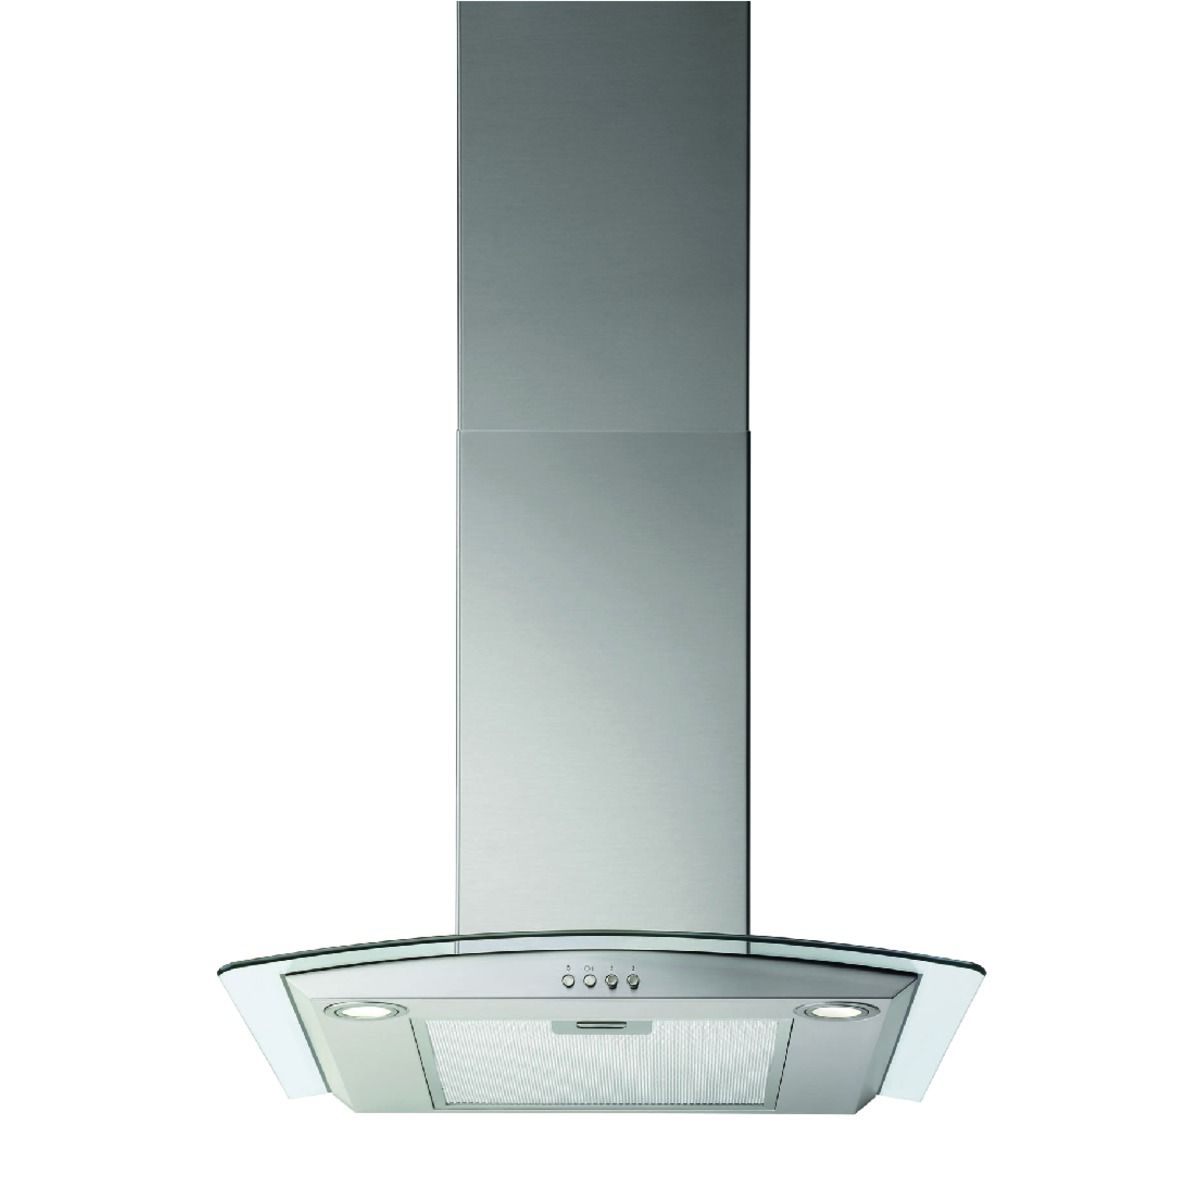 Image of Wickes 60cm Curved Glass Designer Cooker Hood - Stainless Steel